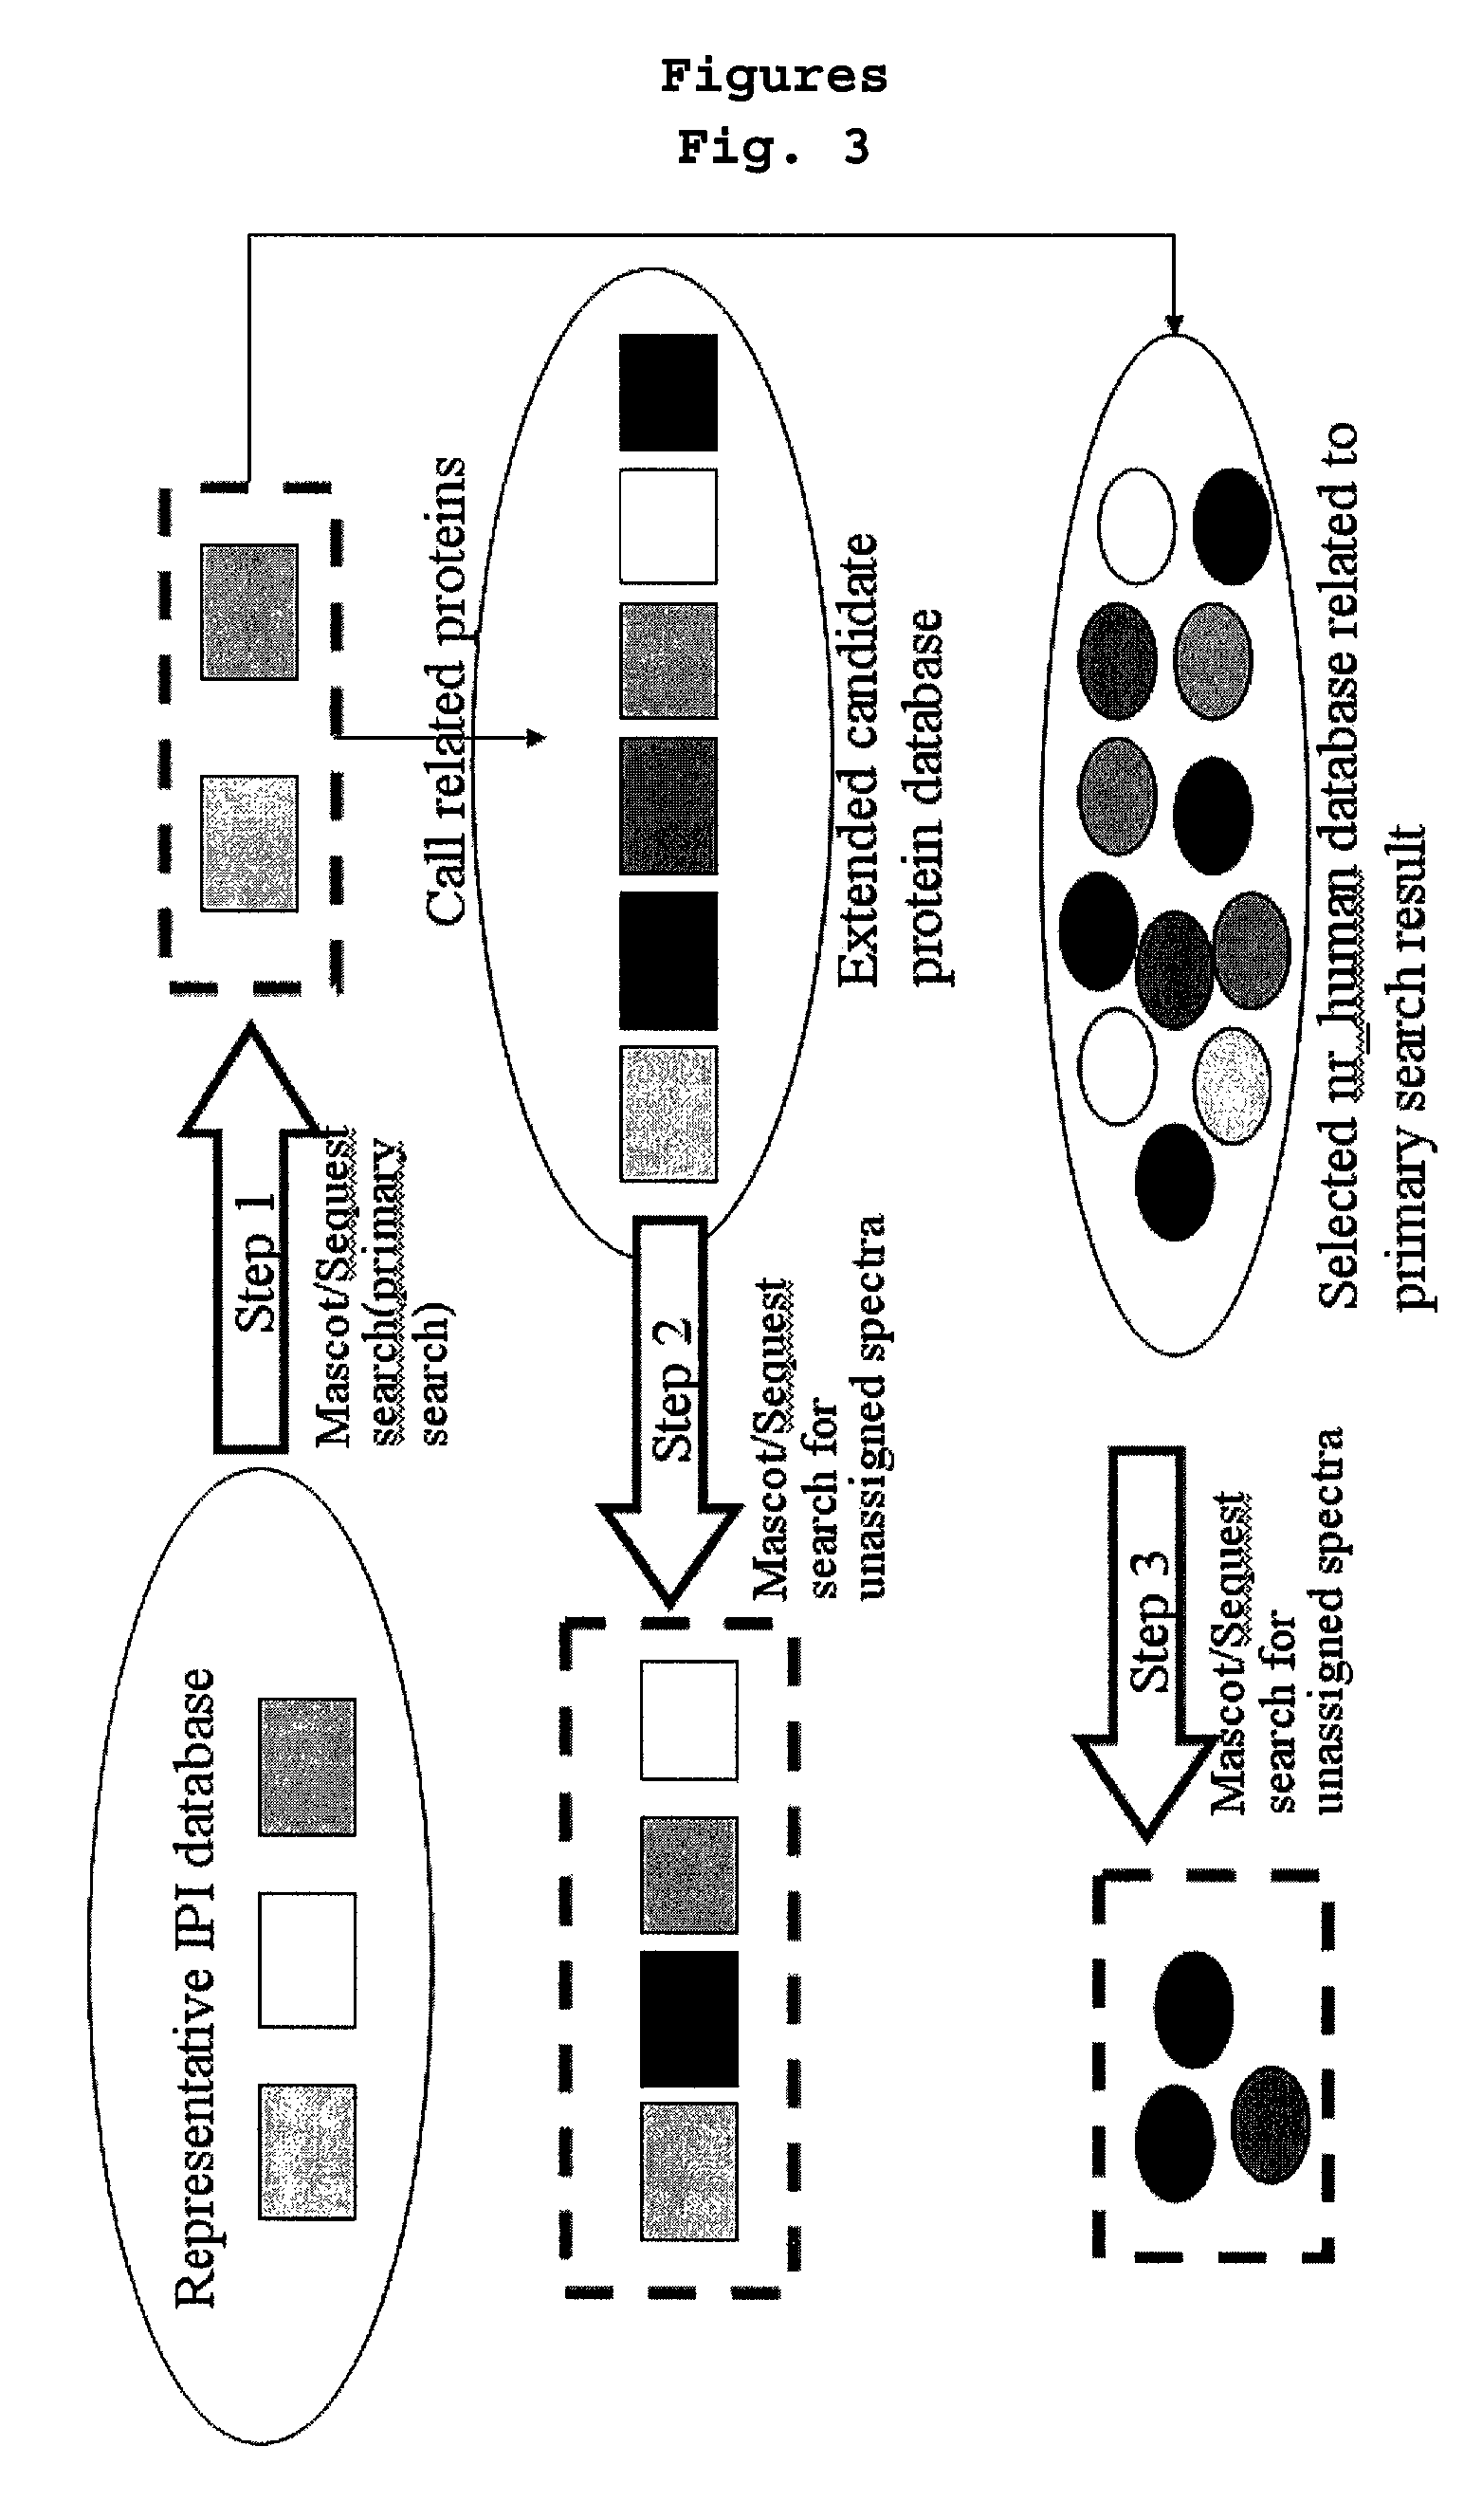 Method for reconstructing protein database and a method for screening proteins by using the same method